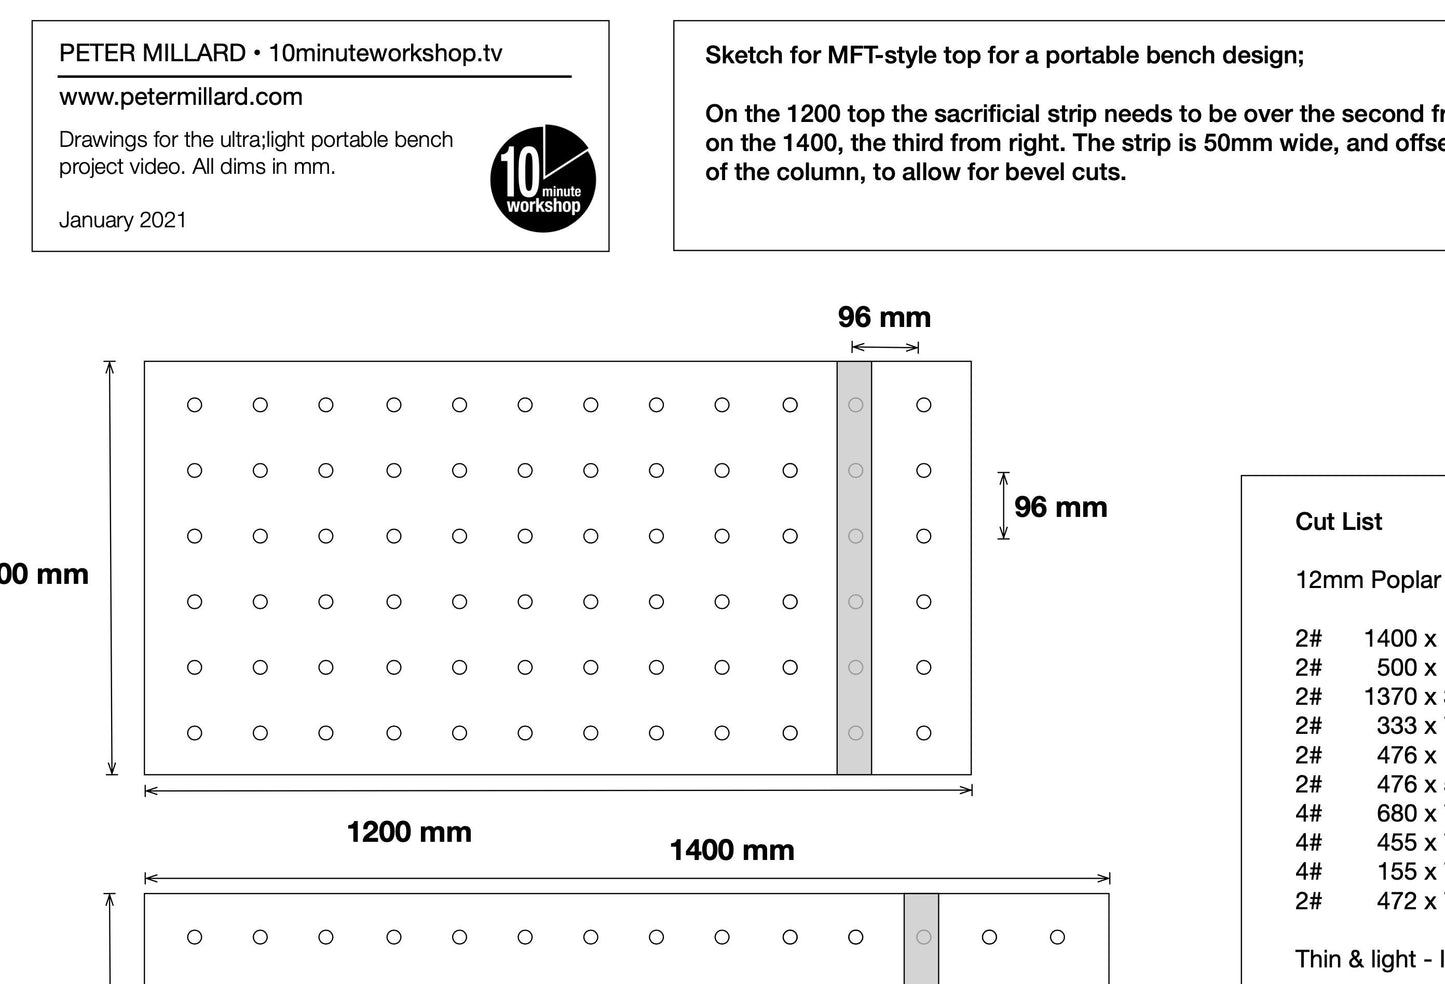 Ultralight Portable Bench plans - for benches made from 12mm thick material